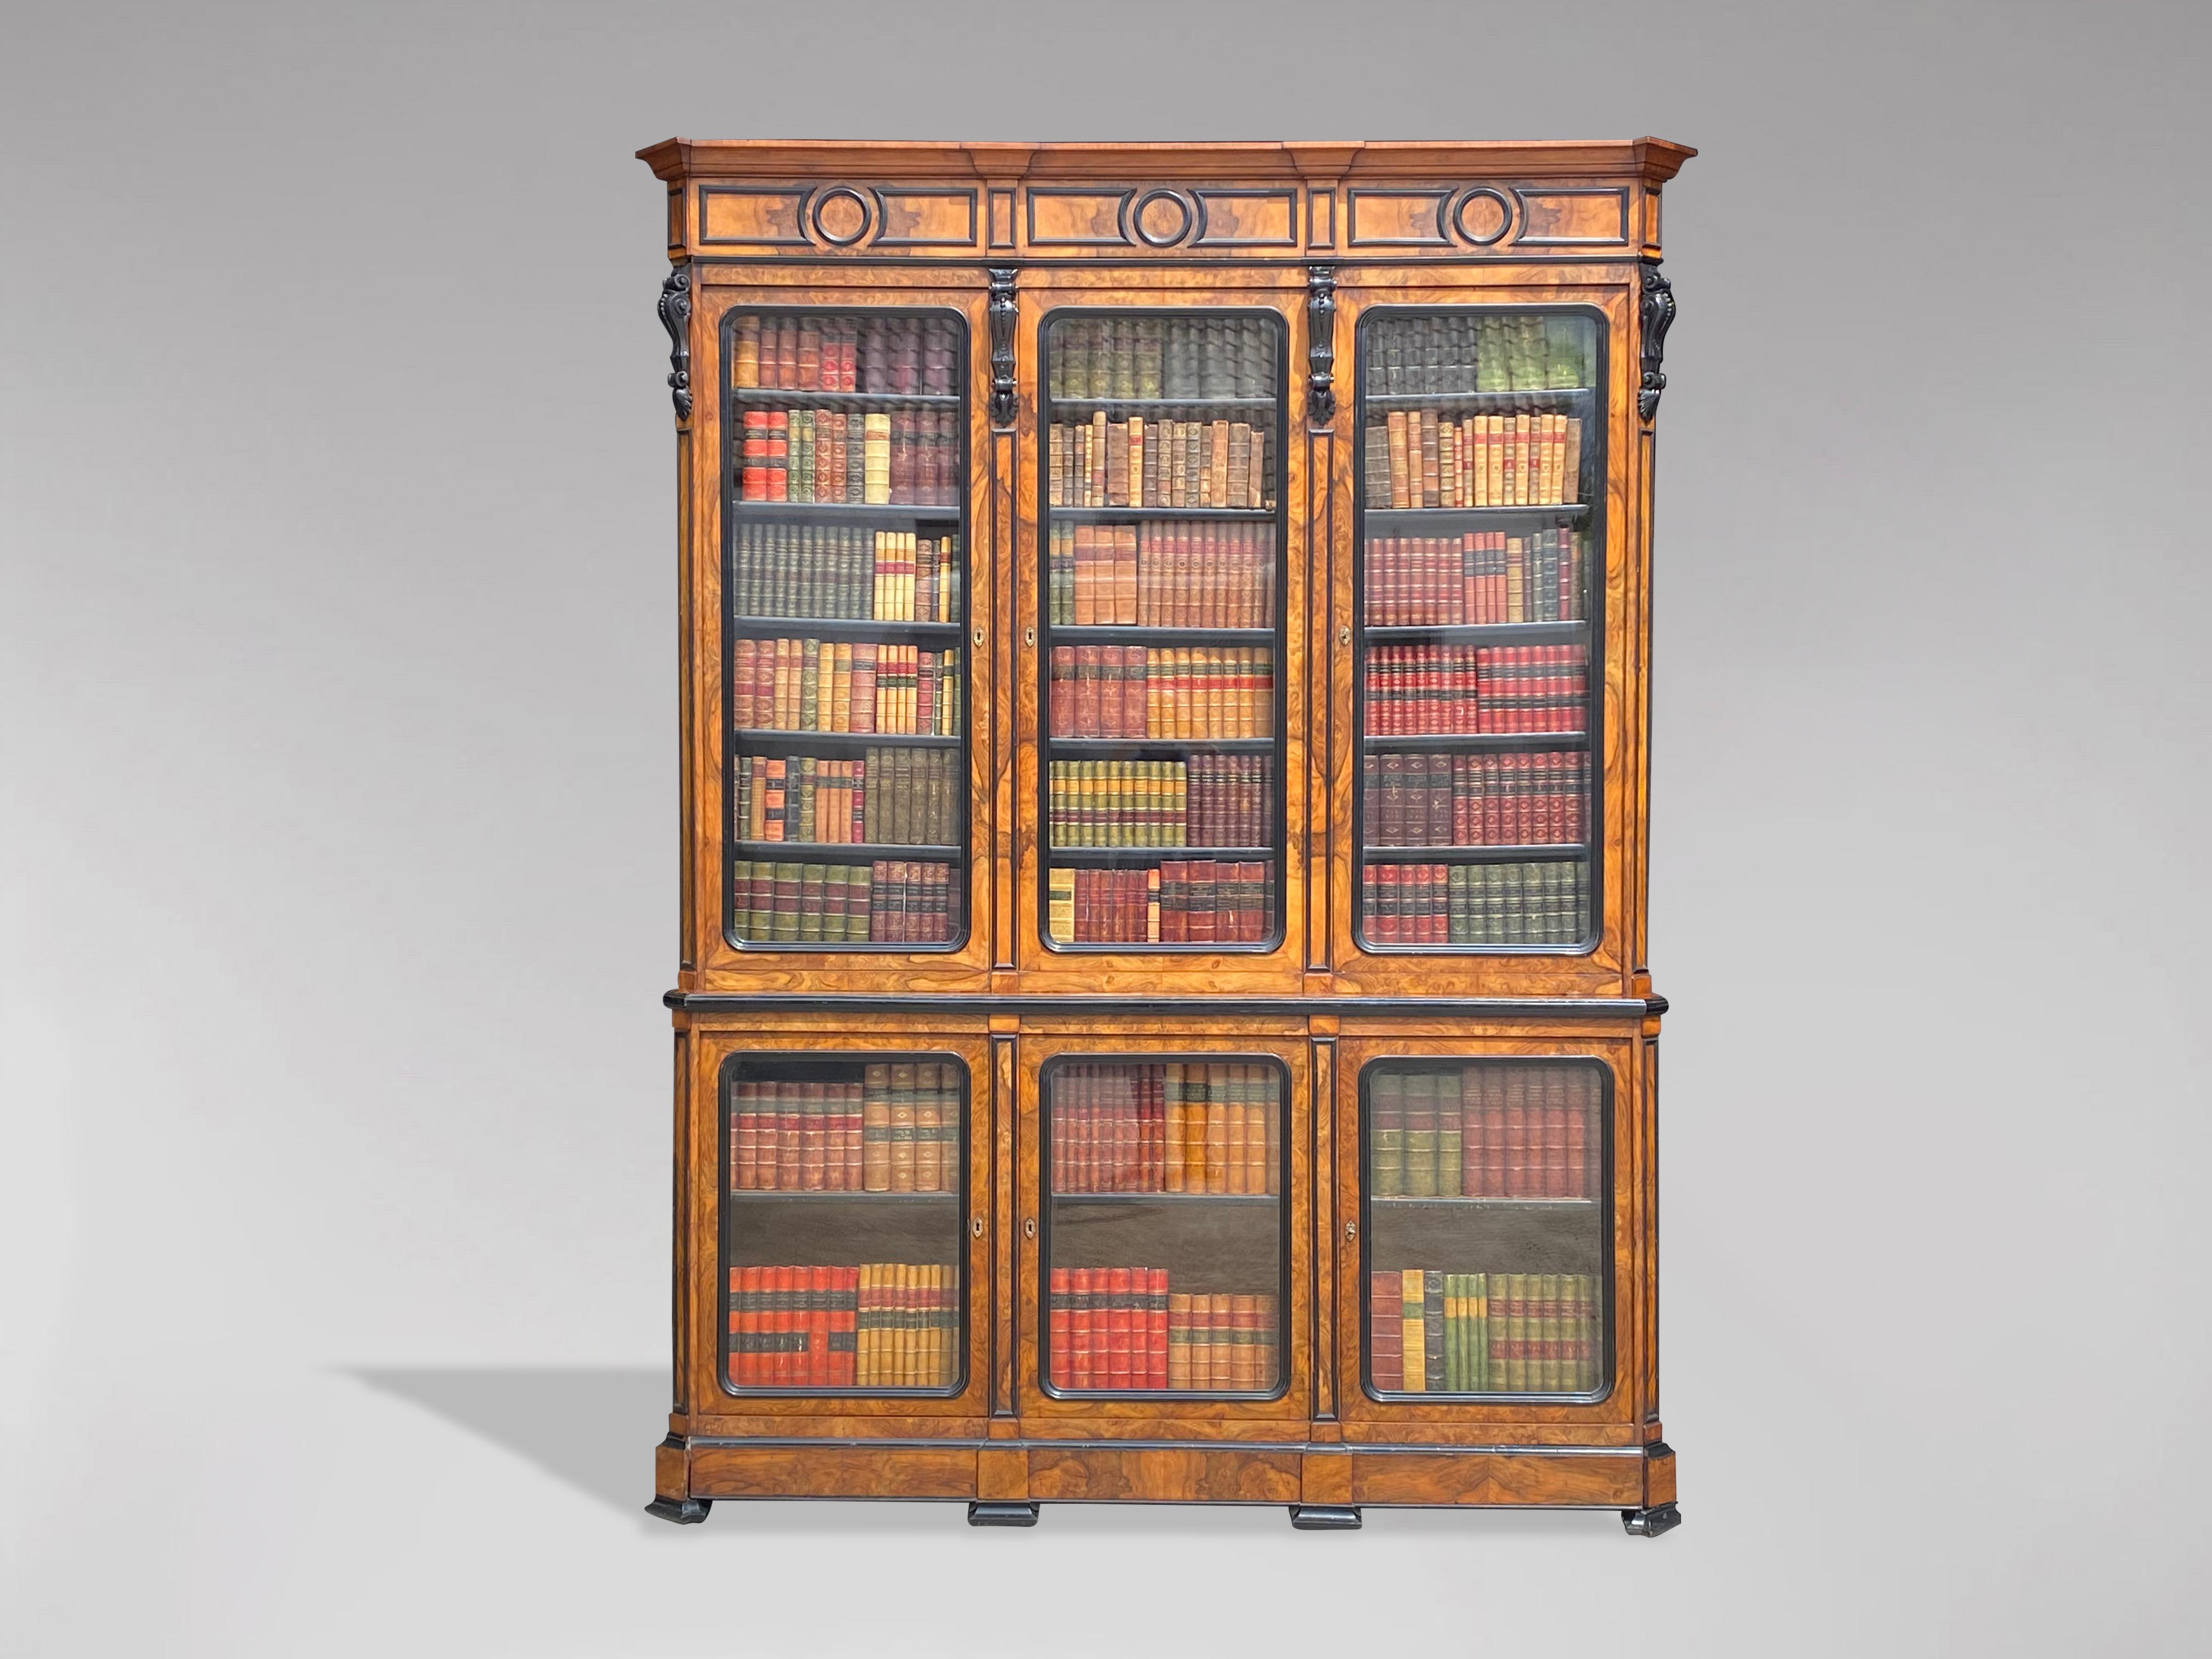 A superb quality and exceptional French mid-19th century solid walnut and ebonized three door bibliotheque or library bookcase. With tall moulded cornice above three ebonized trim glazed doors enclosing five solid adjustable shelves with black